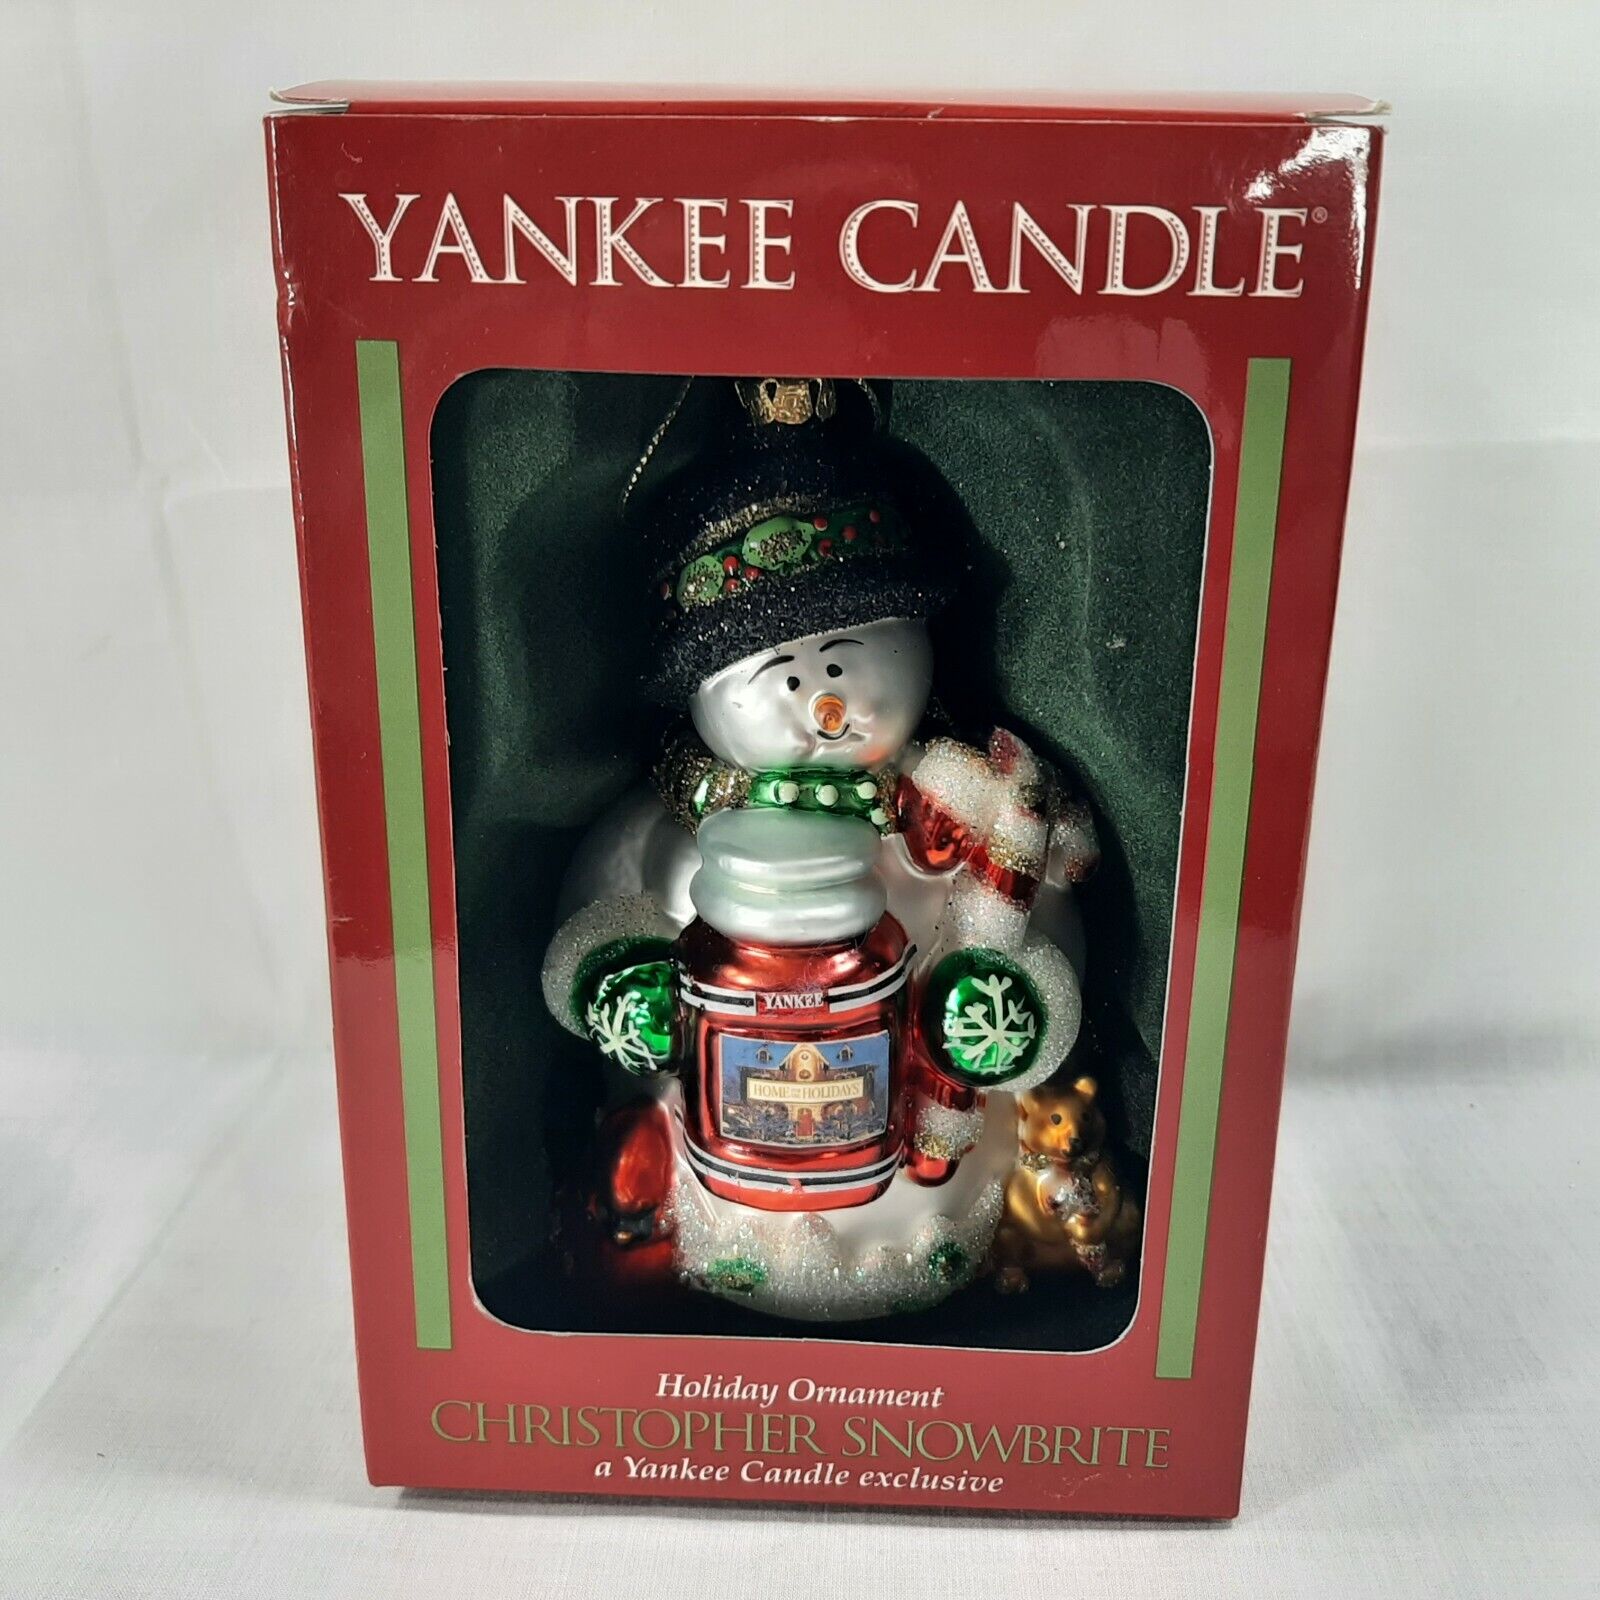 Yankee Candle Christopher Snowbrite Christmas Ornament Snowman with Candle 